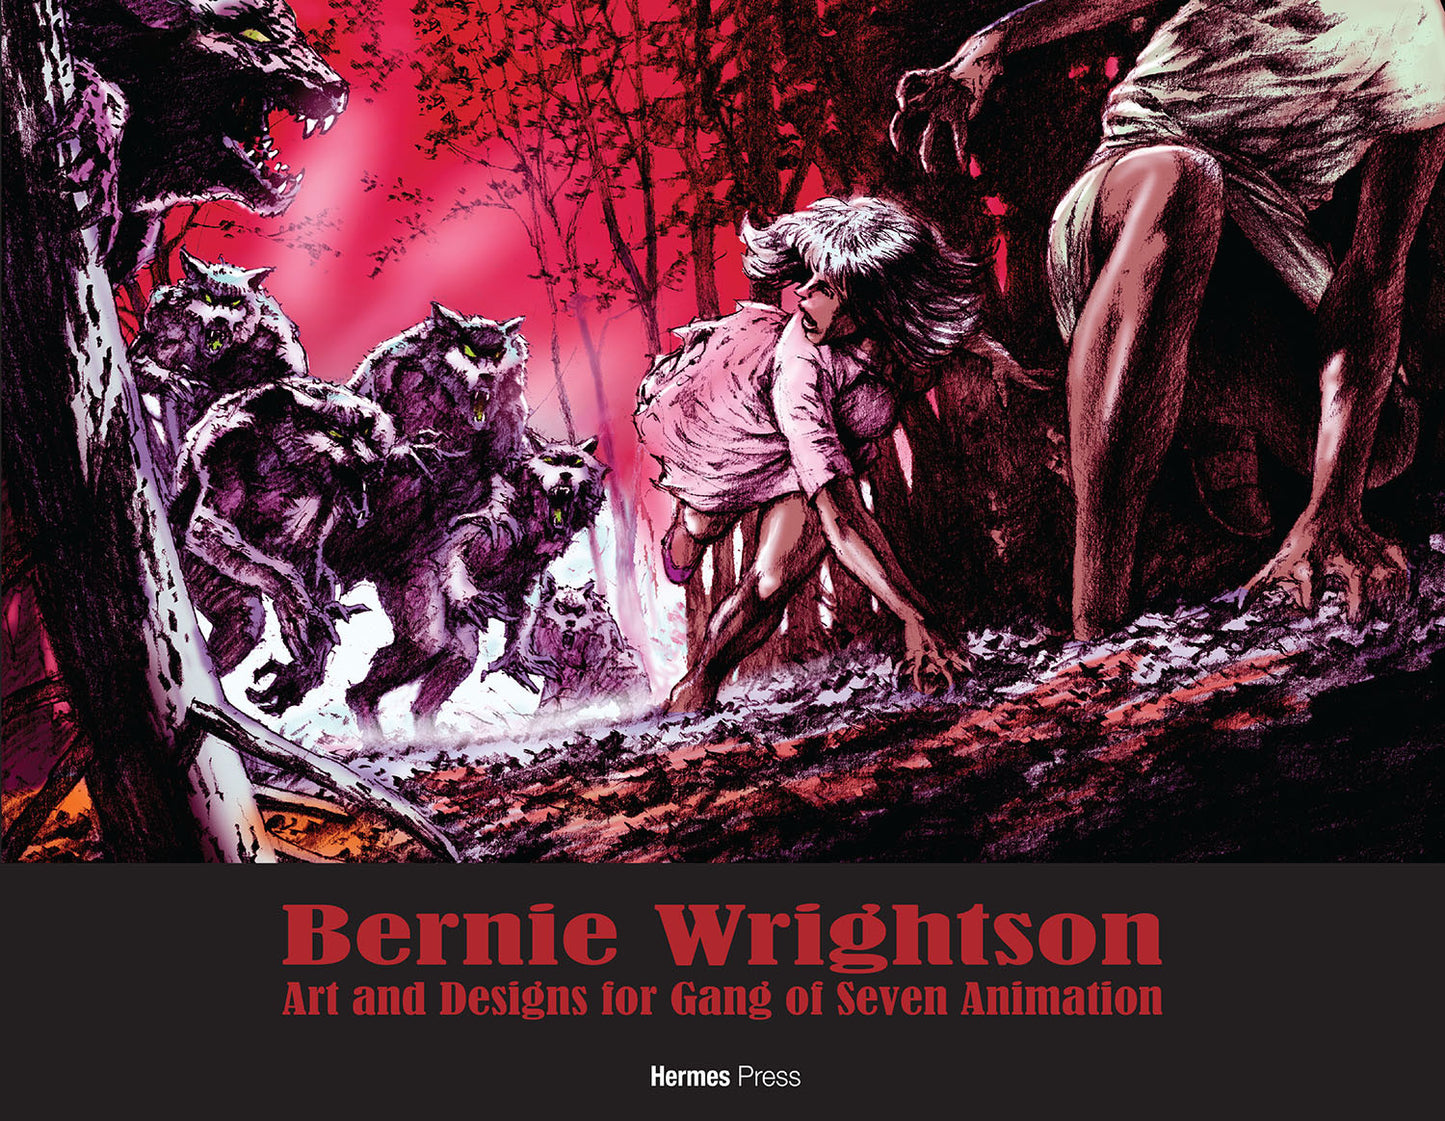 Bernie Wrightson: Art and Designs for the Gang of Seven Animation Studio SDCC Limited Edition